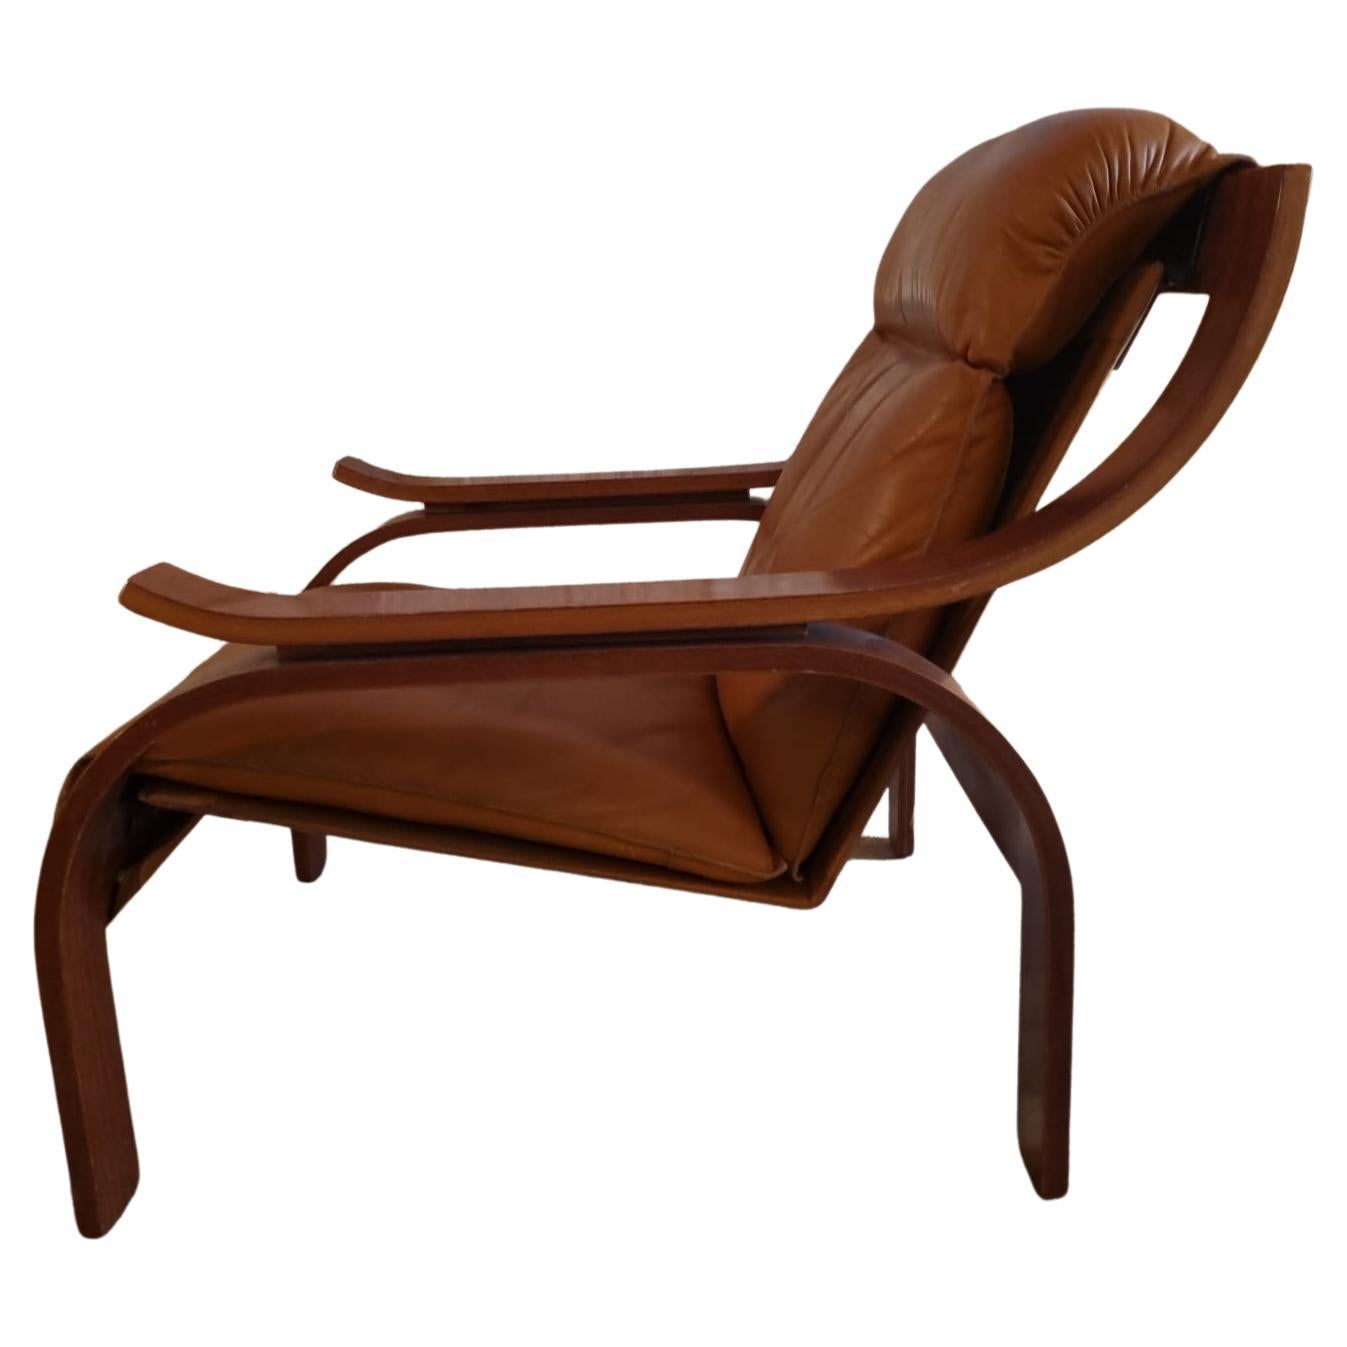 Marco Zanuso "Woodline" Lounge Armchair from the 1960s for Artflex For Sale